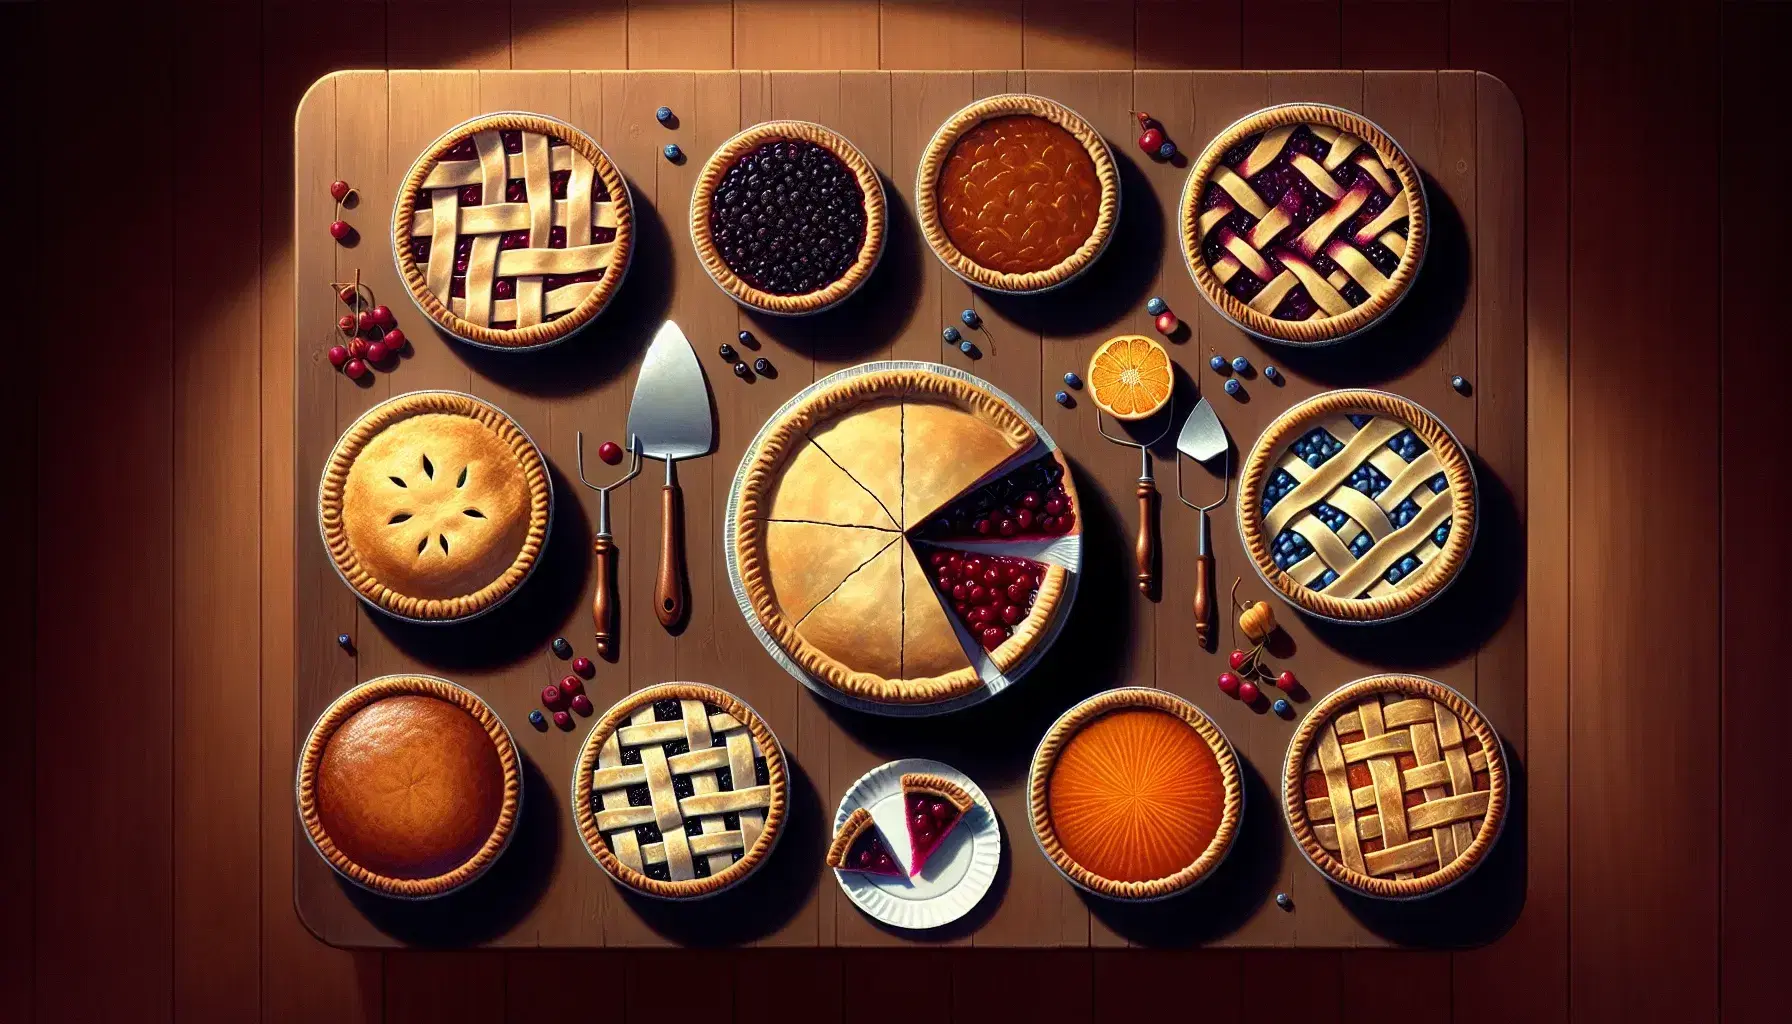 Assorted freshly baked pies on a wooden table, including cherry, blueberry, apple lattice, and pumpkin, each cut into slices with pie servers beside them.